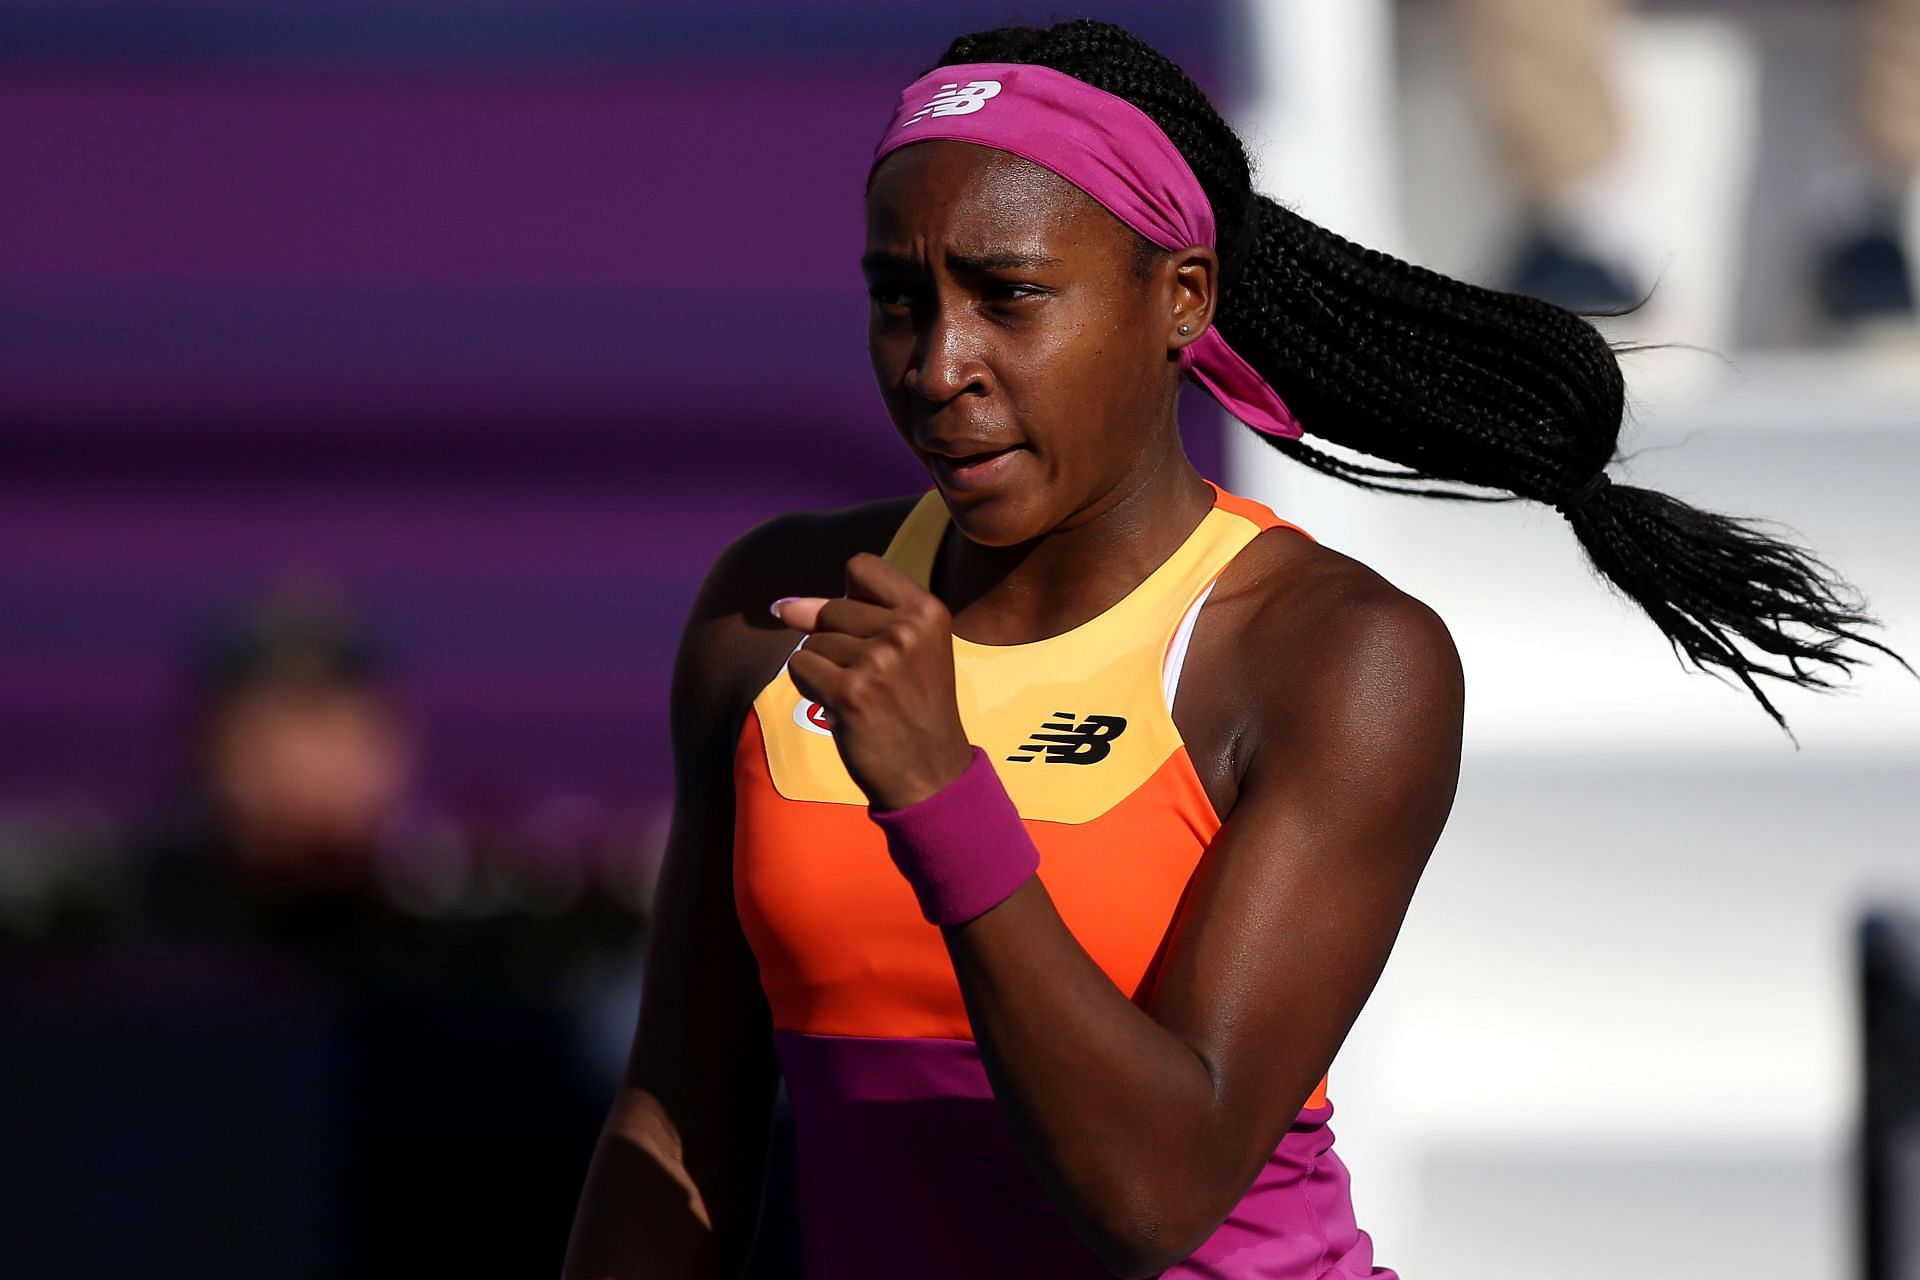 Coco Gauff takes on Claire Liu in her first match at the 2022 Indian Wells Open